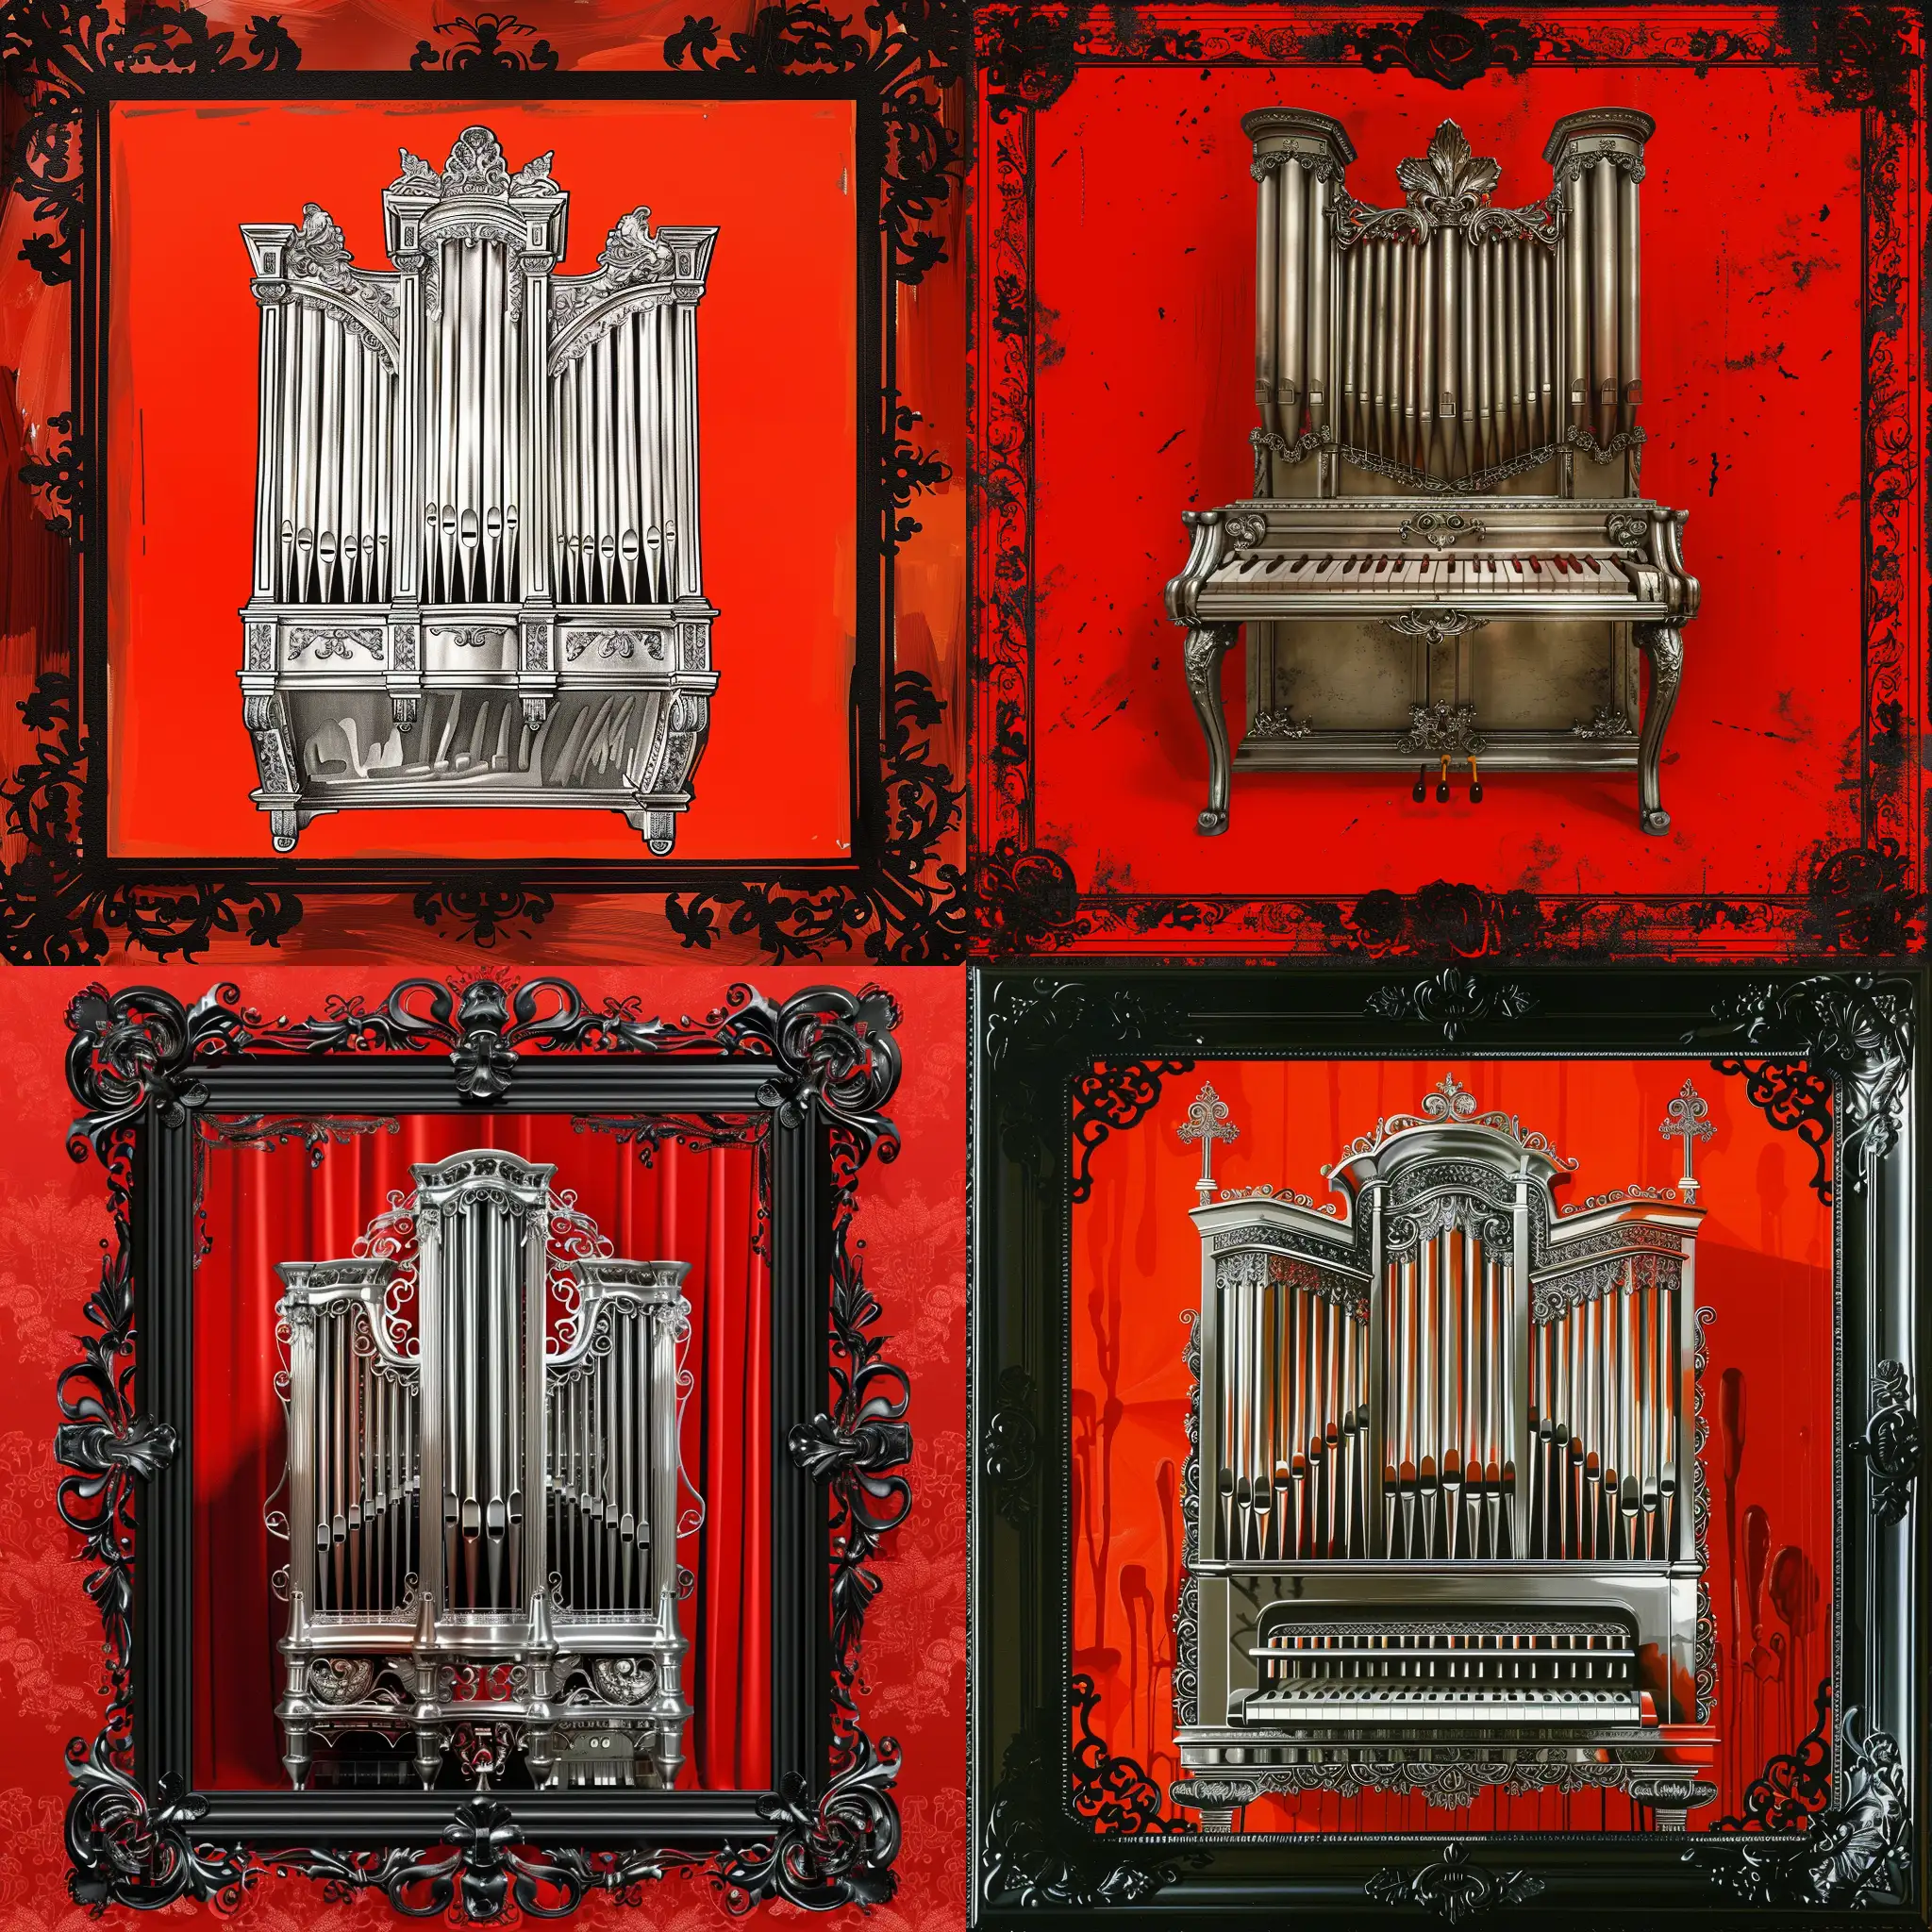 Silver-Slavic-Organ-on-Bright-Red-Background-with-Delicate-Filigree-Frame